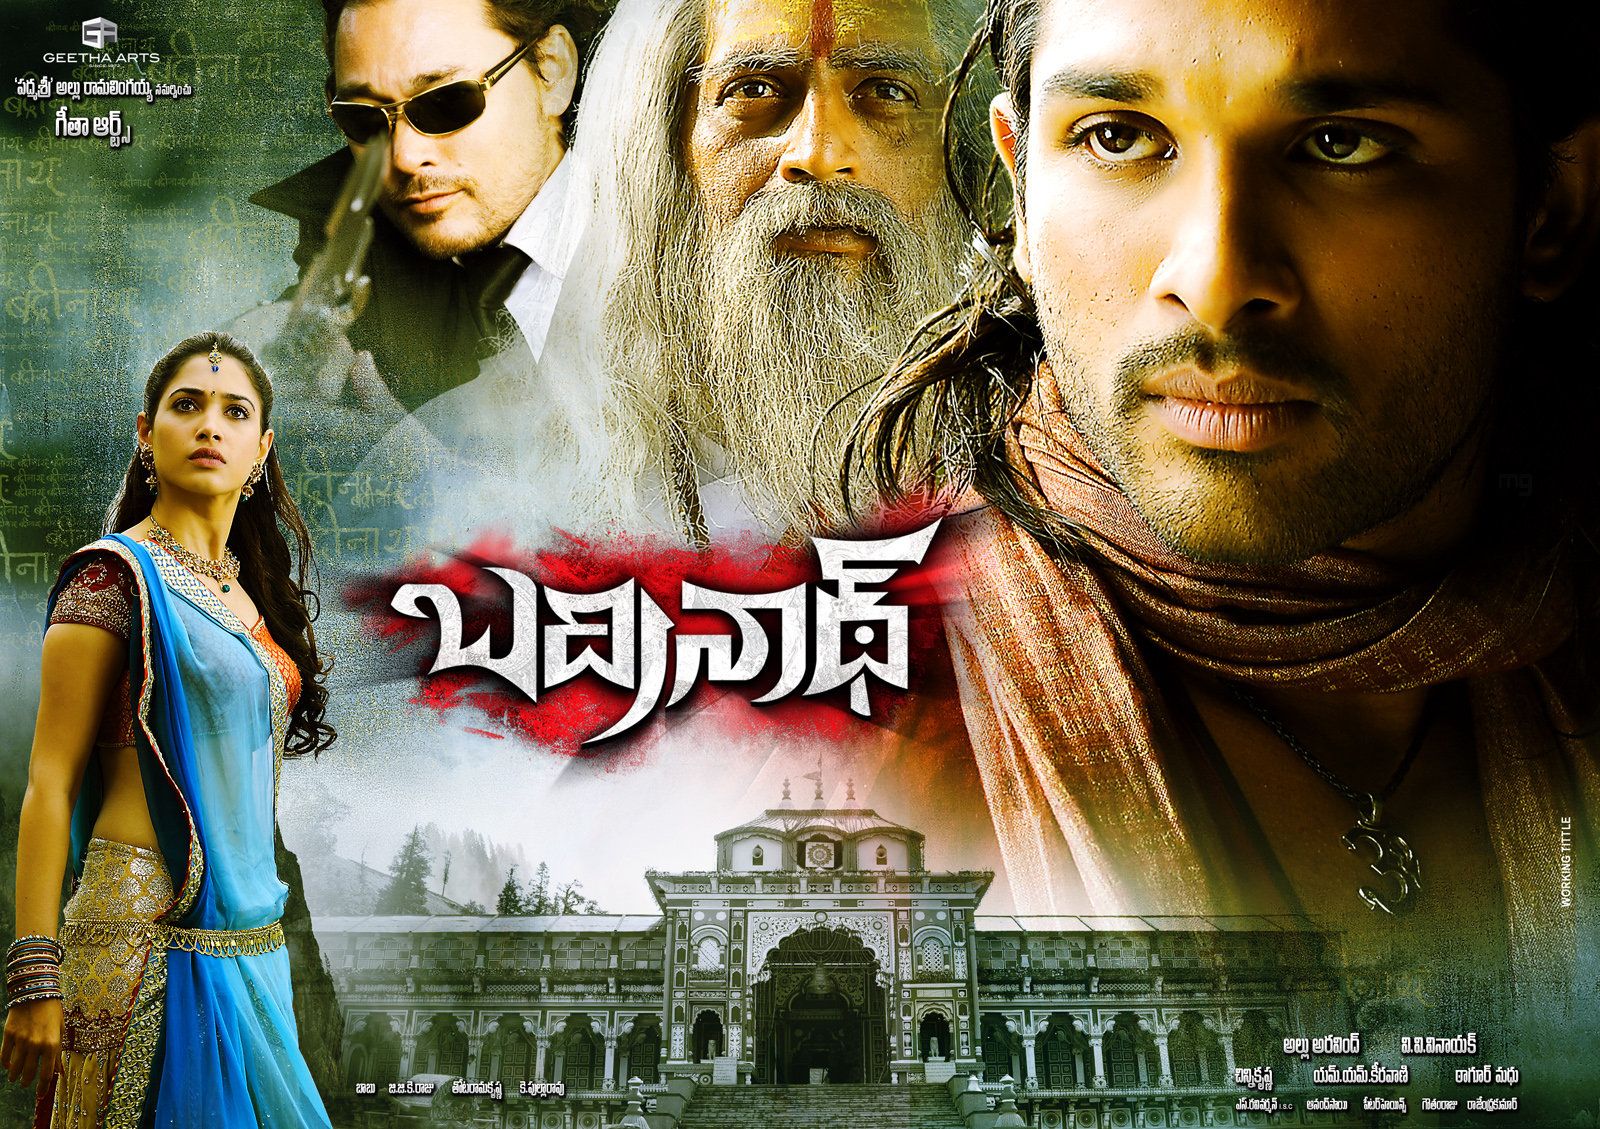 badrinath full movie in hindi dubbed download utorrent for iphone